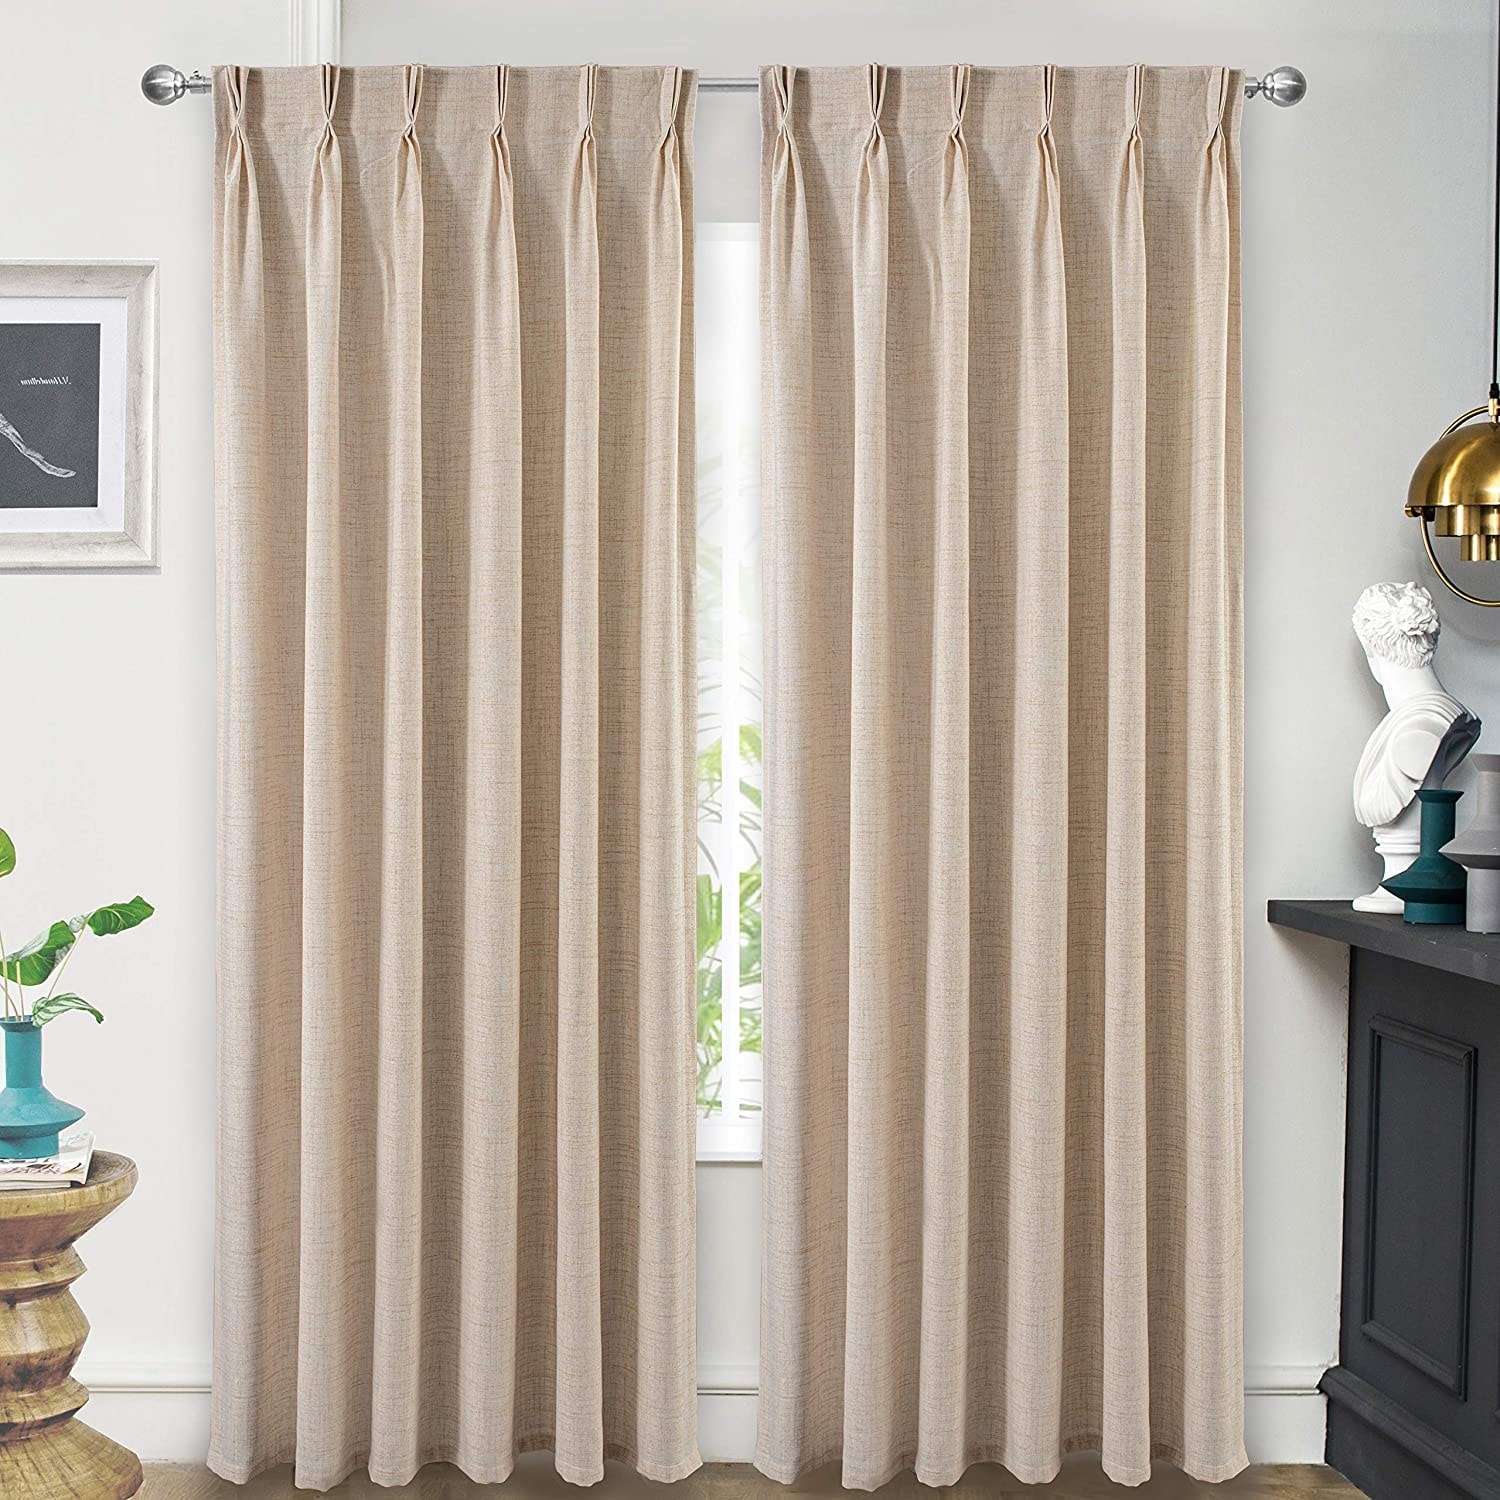 102 Inches Curtains - Bed Bath & Beyond